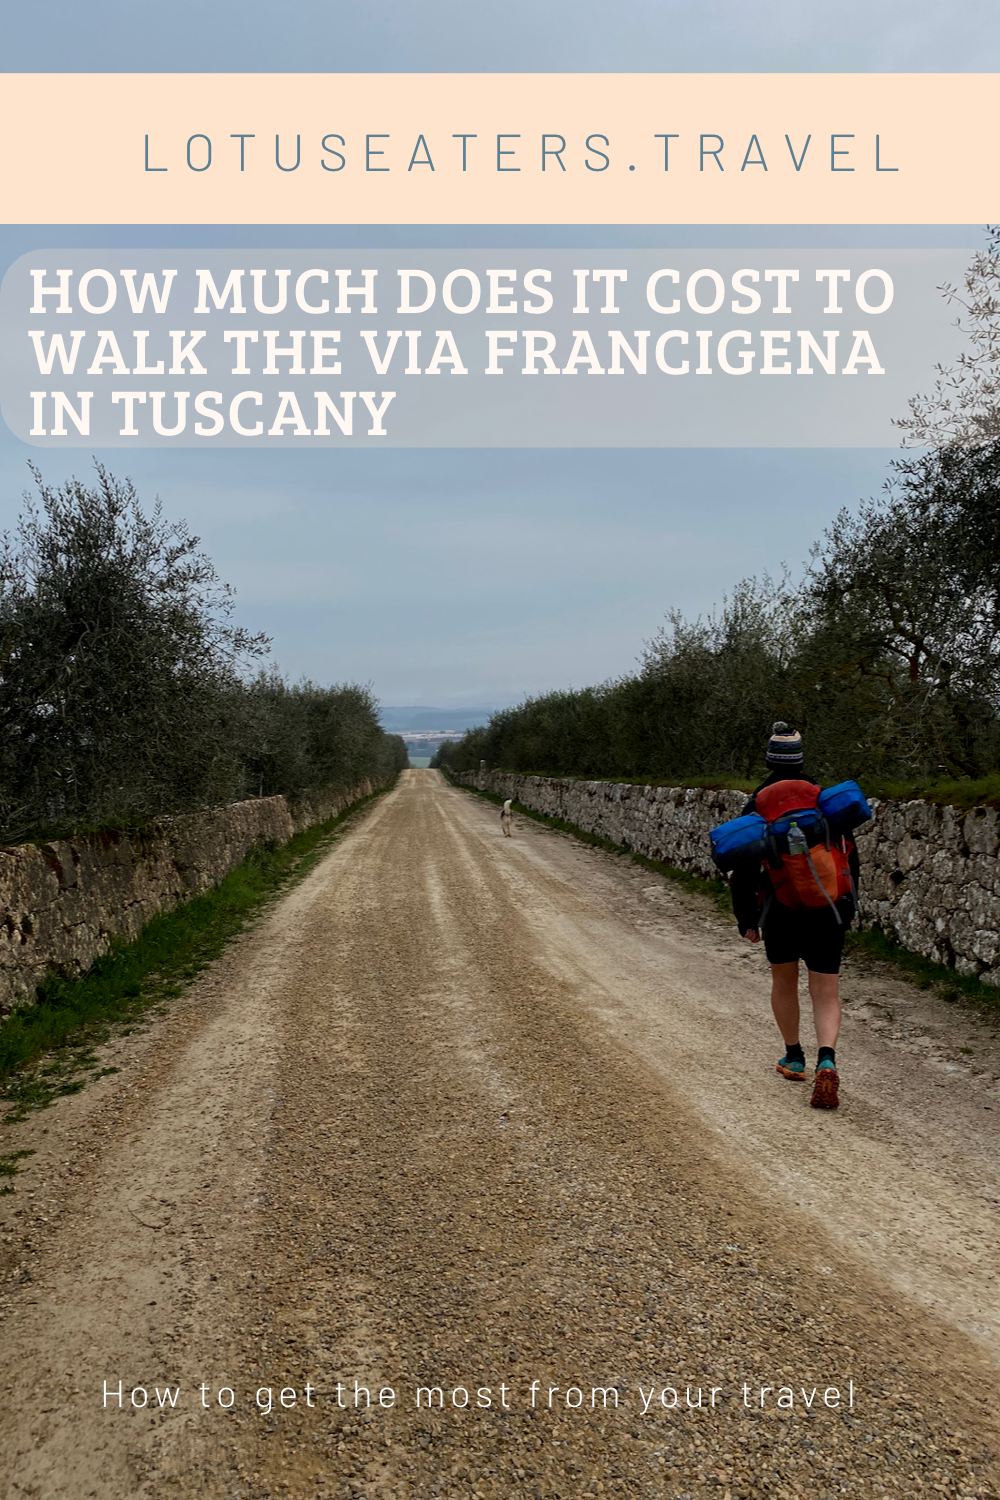 How much does it cost to walk the Via Francigena in Tuscany?